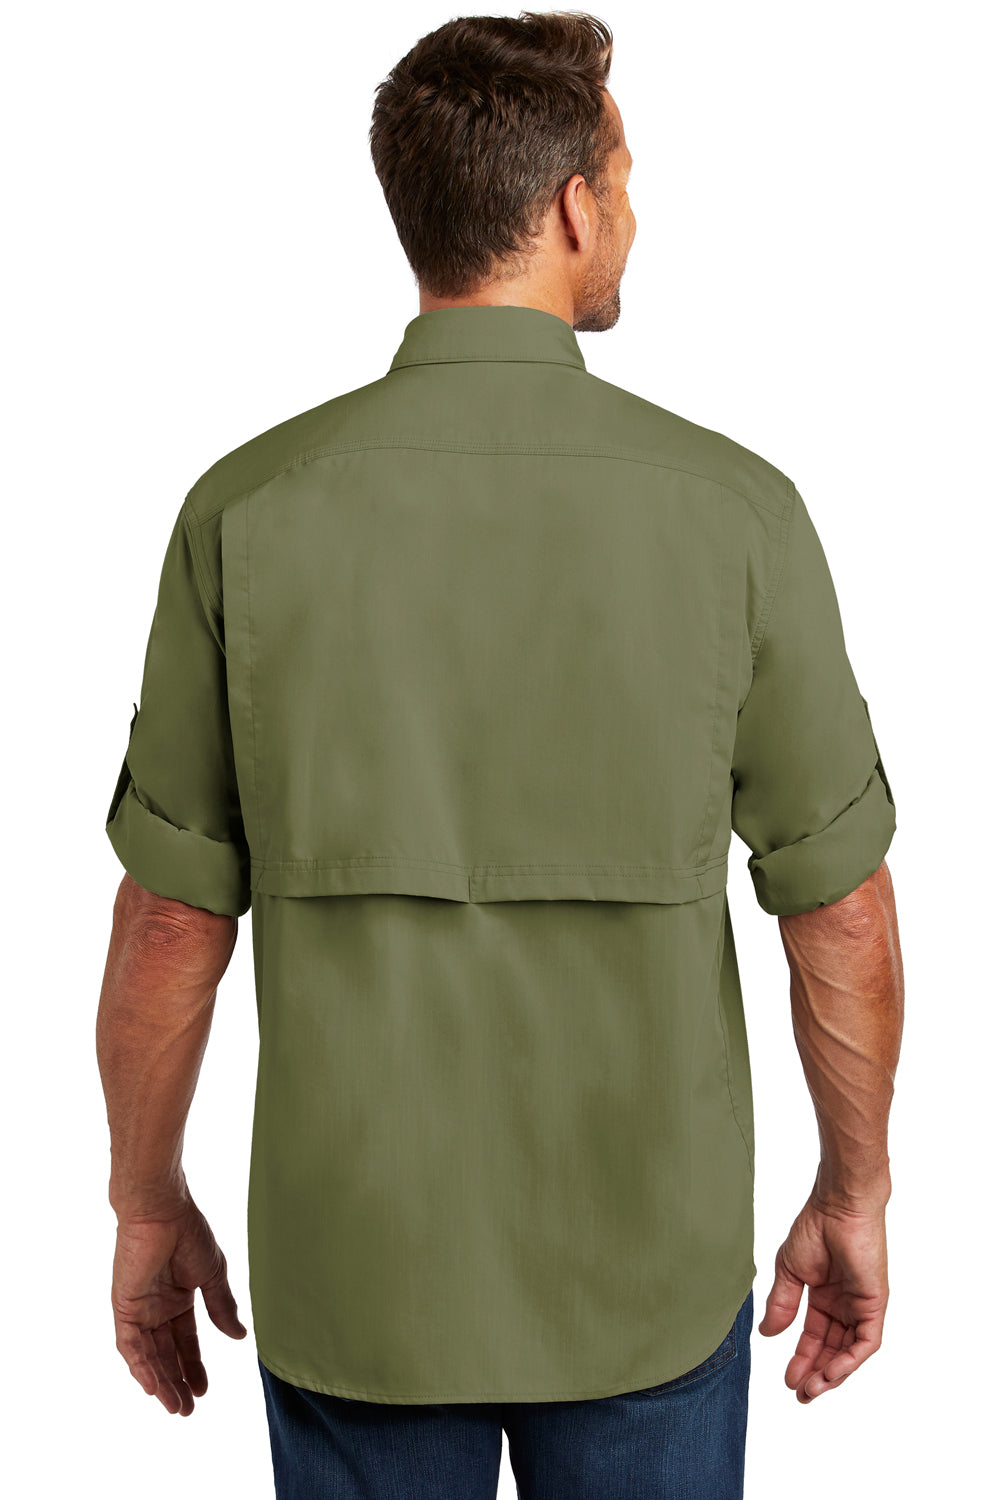 Carhartt CT102418 Mens Force Ridgefield Moisture Wicking Long Sleeve Button Down Shirt w/ Double Pockets Olive Green Back